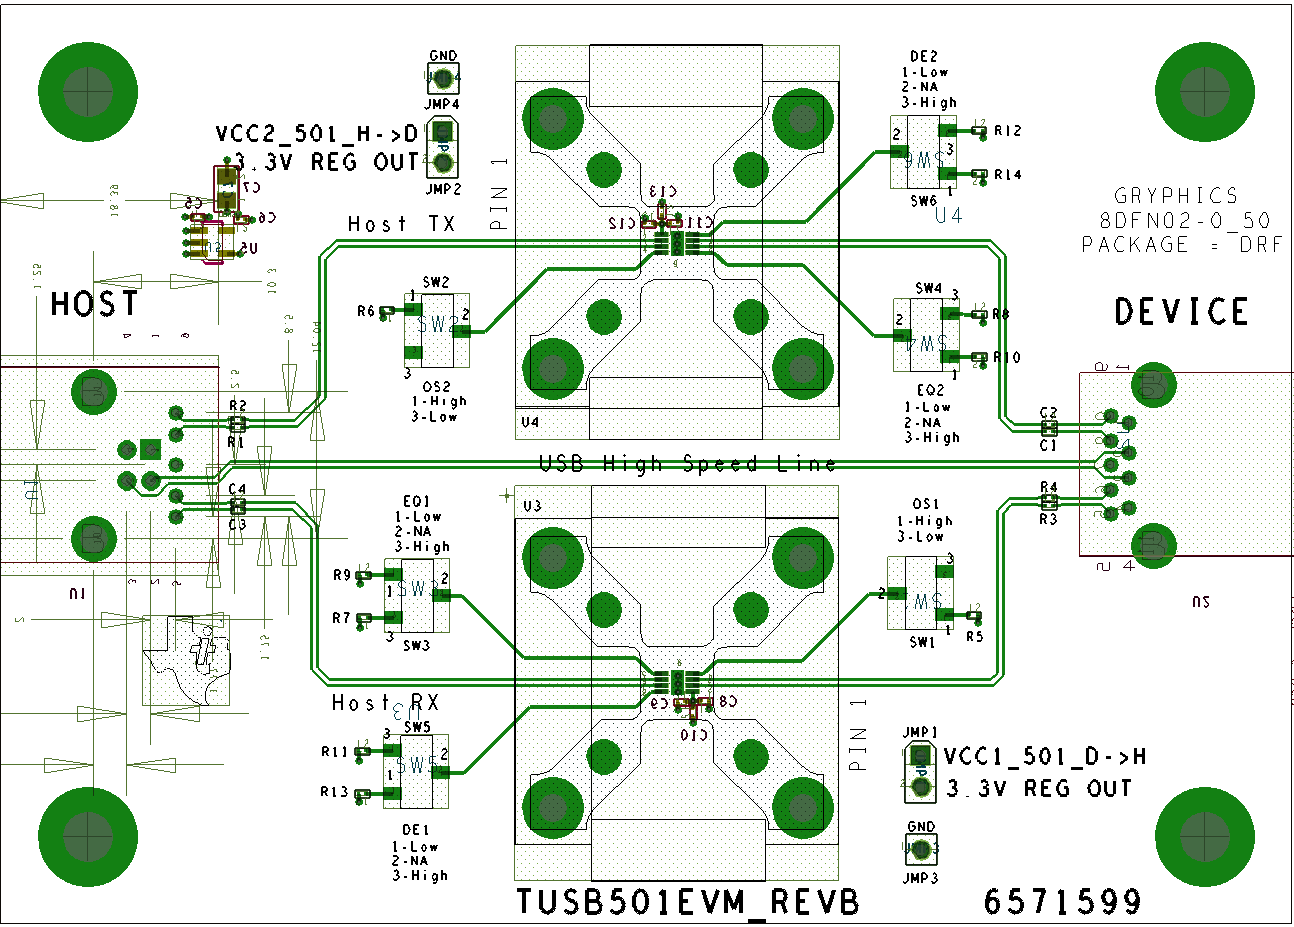 TUSB501-Q1 Layout_example.png